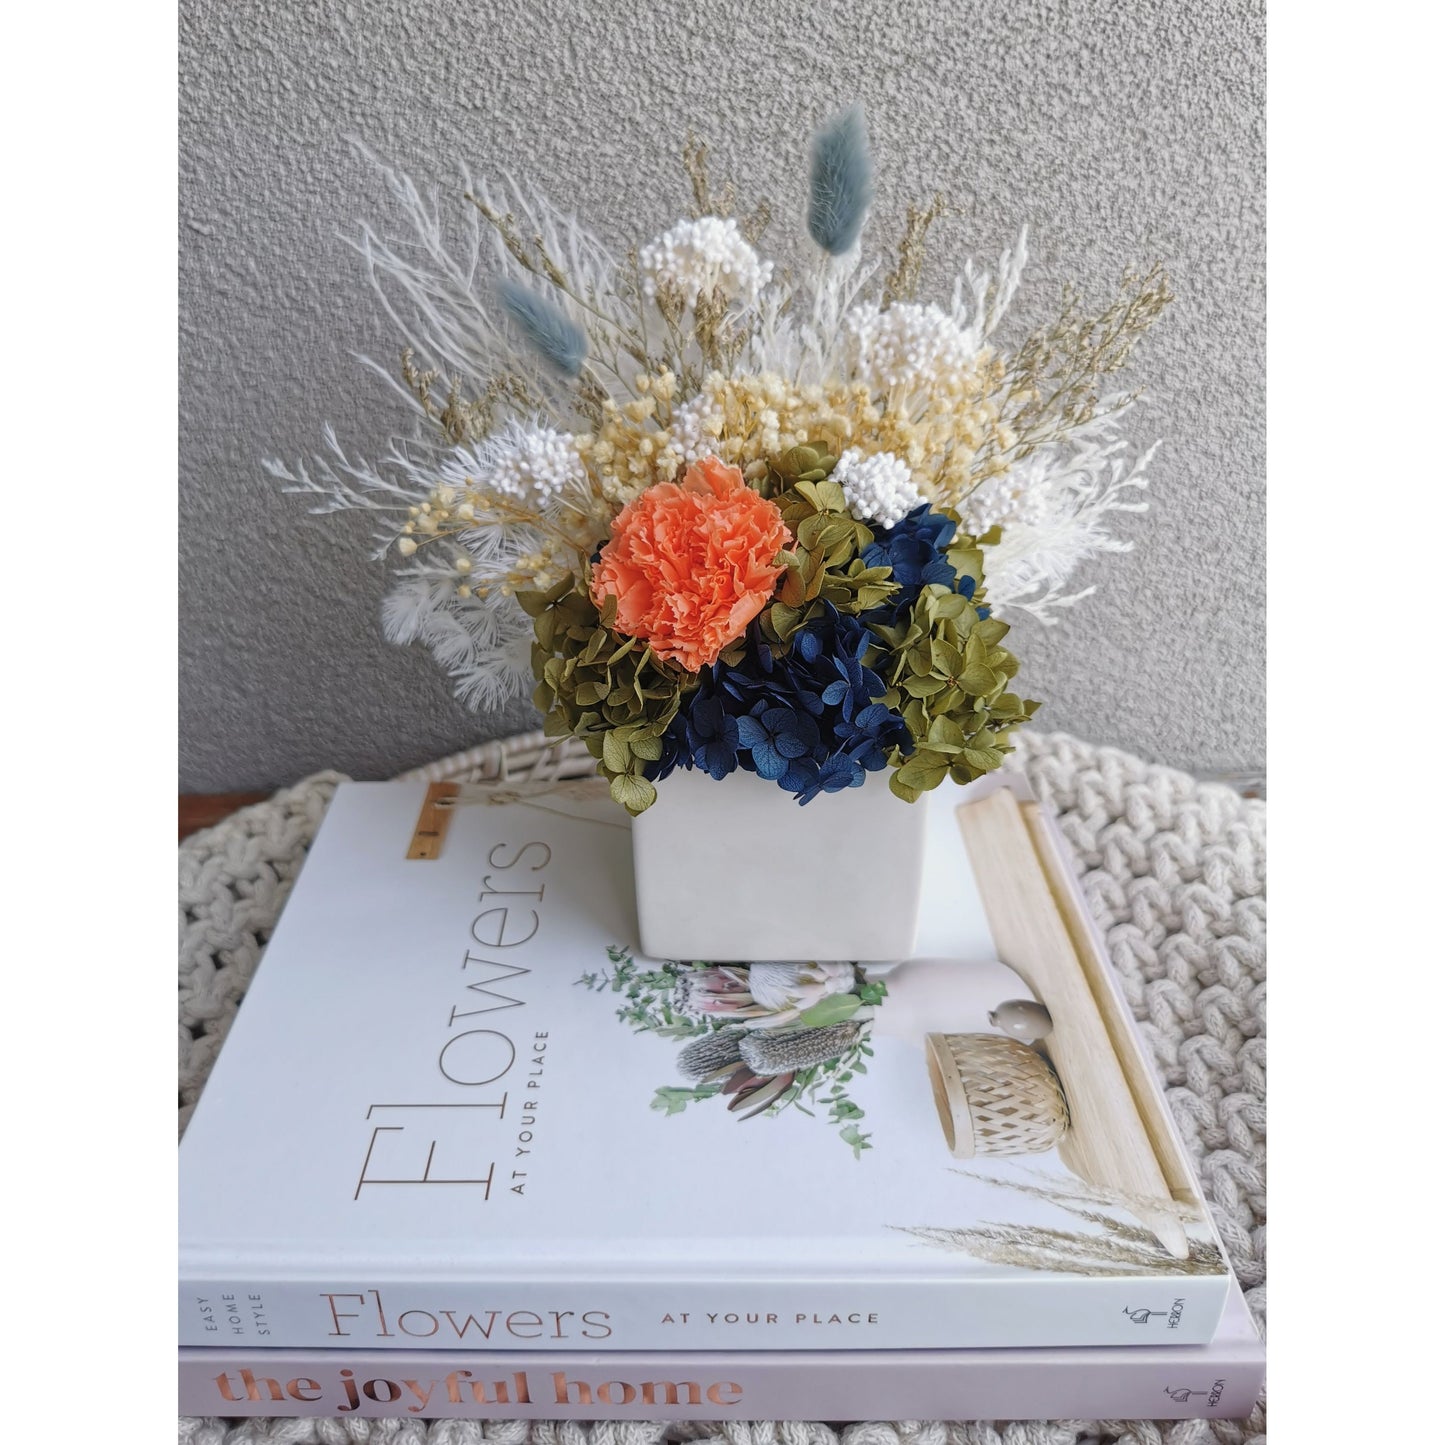 Dried & preserved flower arrangement with navy blue, green, white & orange flowers. Picture shows the arrangement sitting on books on a table in front of a blank wall